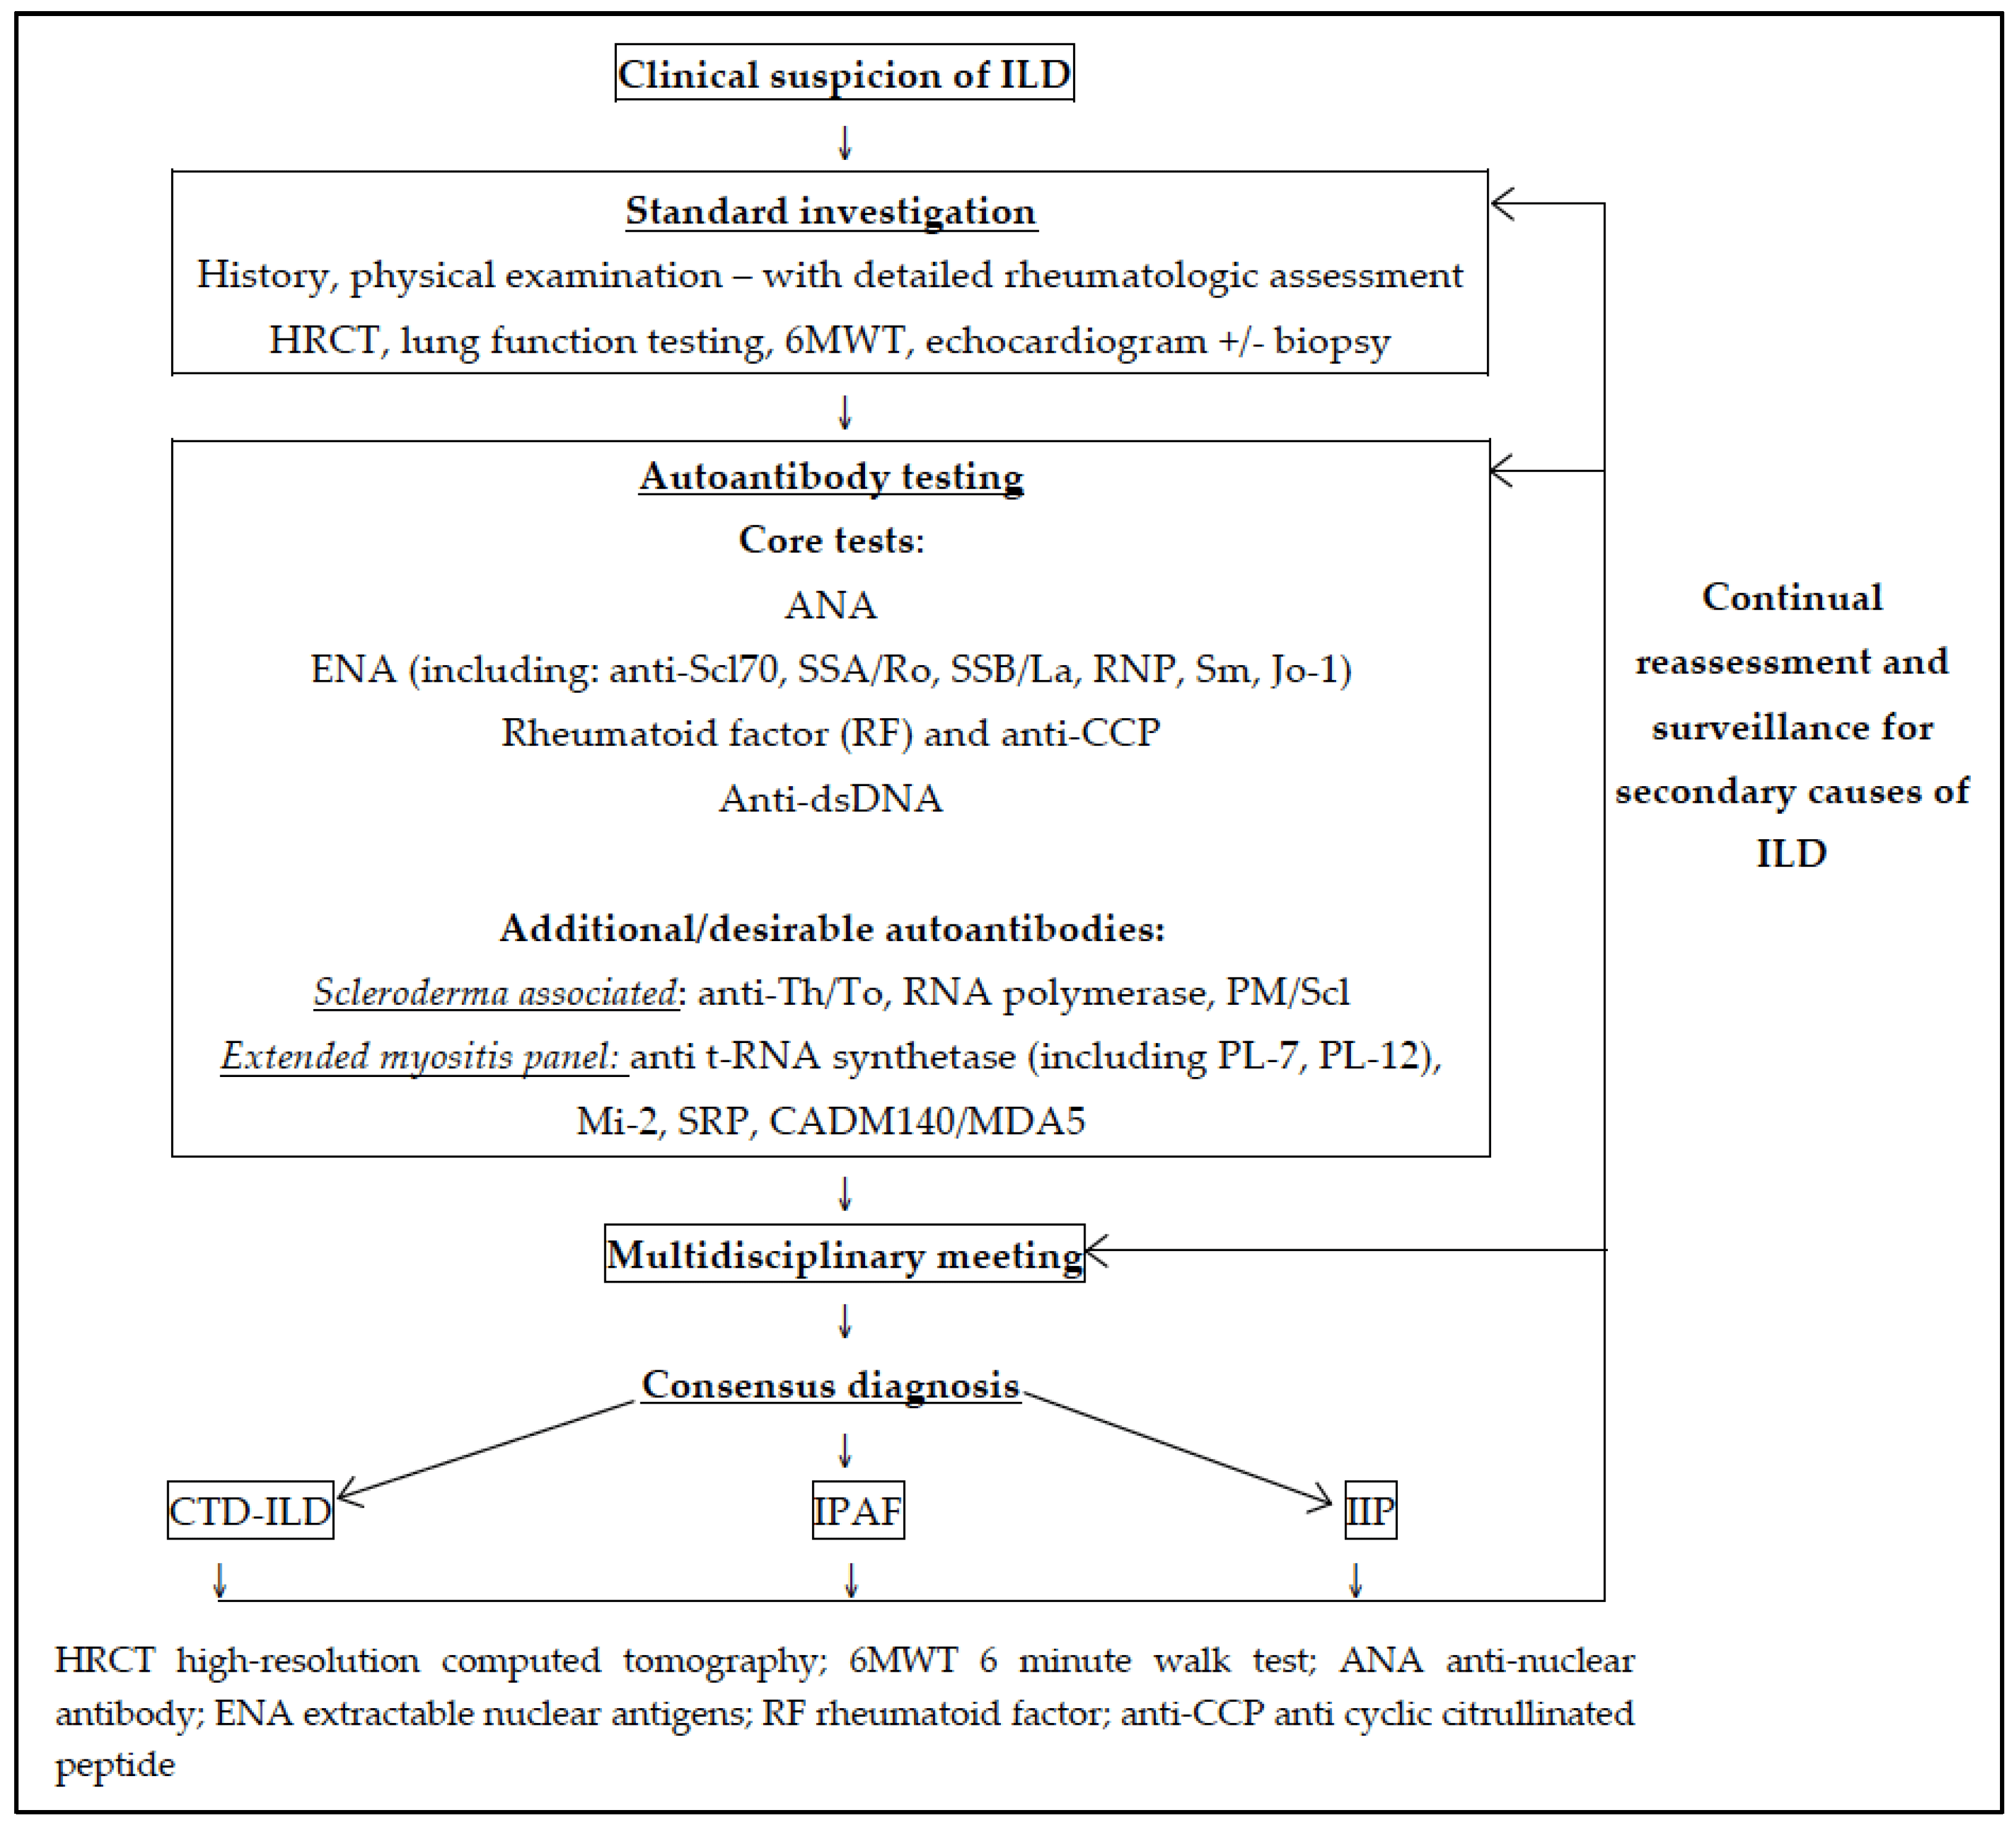 Suggested algorithm for assessment of ILD and autoantibody testing.